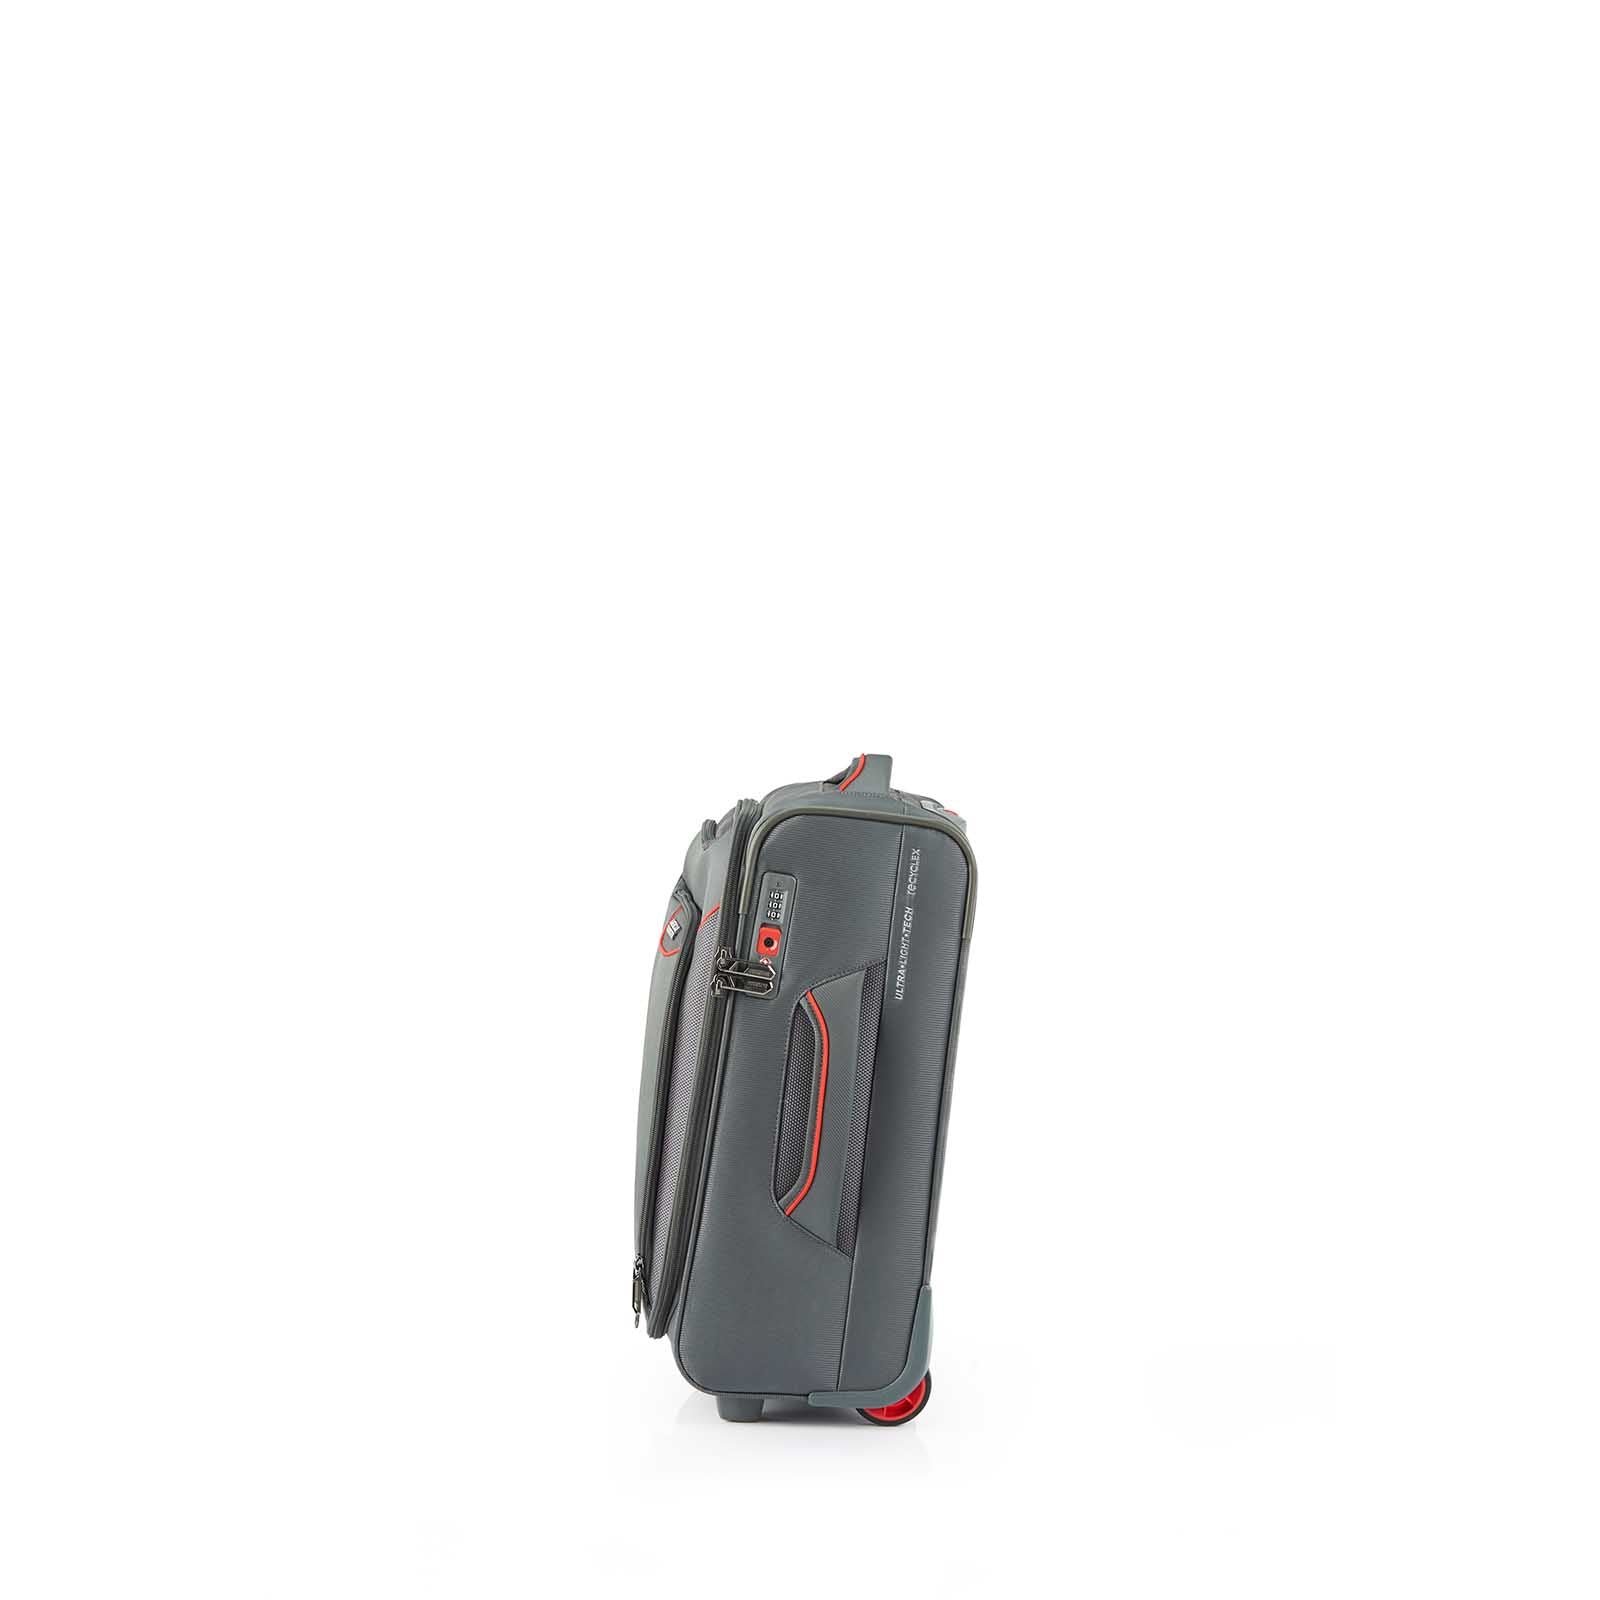 American-Tourister-Applite-4-Eco-50cm-Carry-On-Suitcase-Grey-Red-Side-Handle